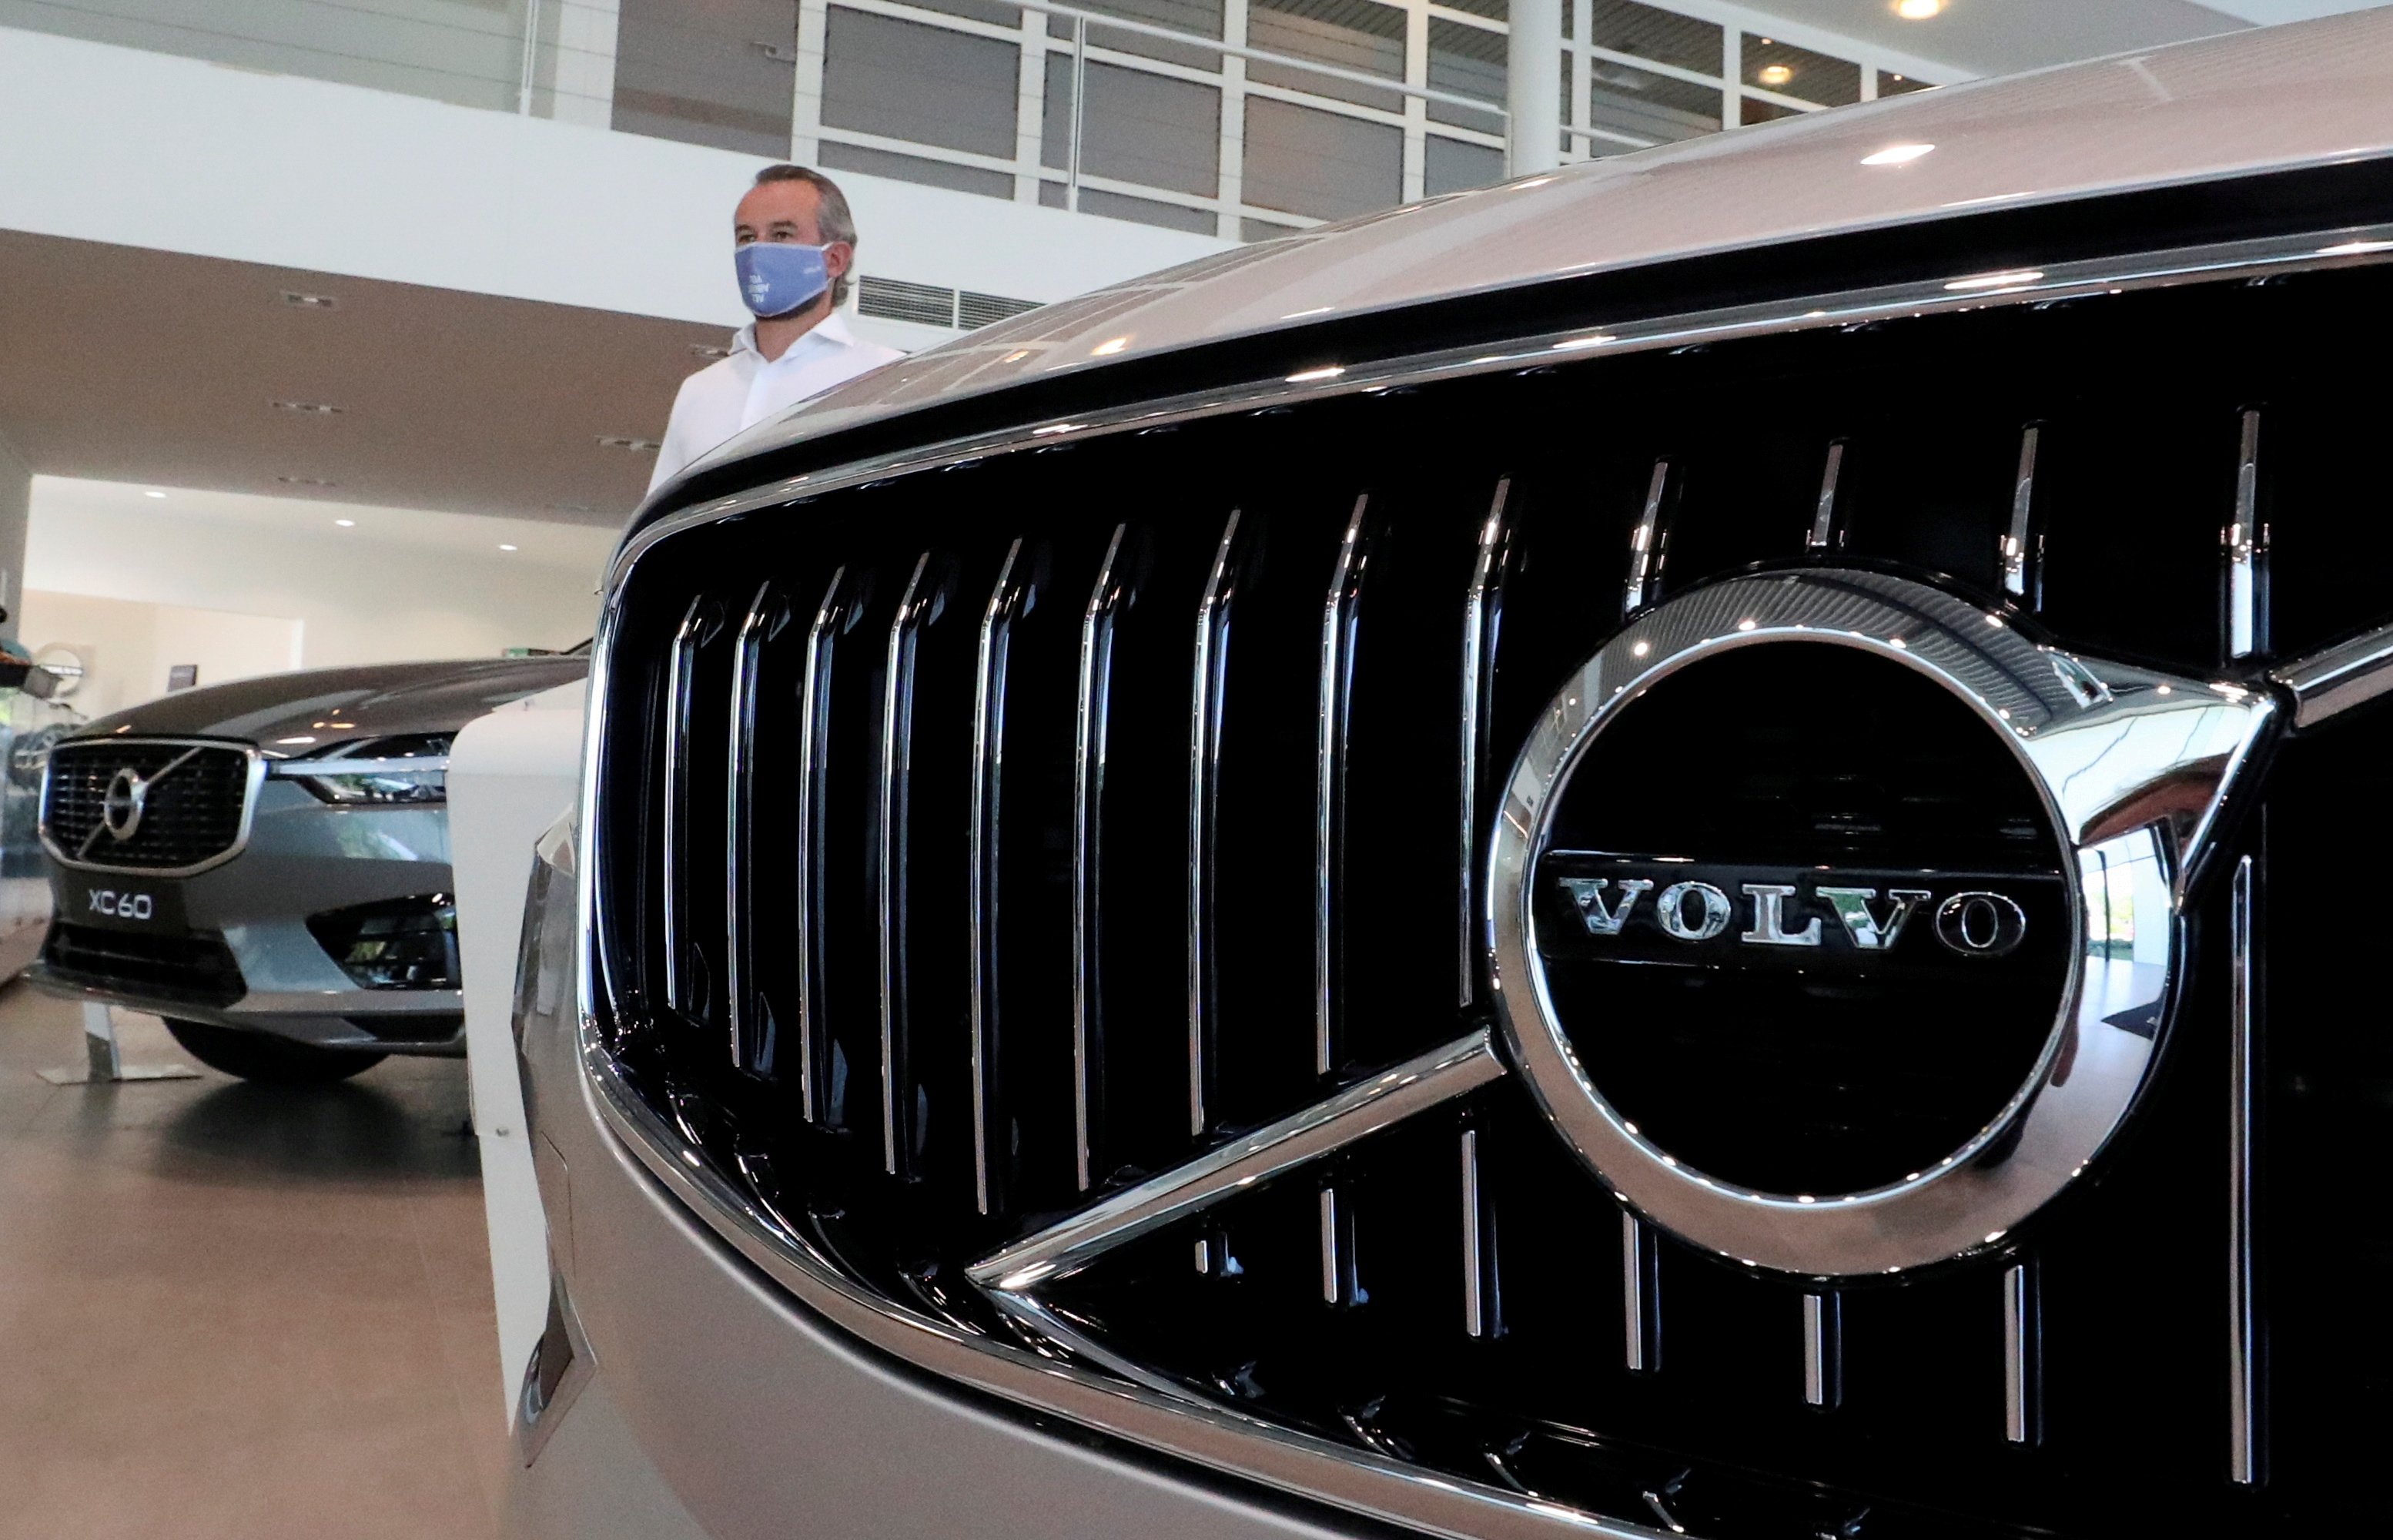 FILE PHOTO: An employee at a Volvo car dealer, wearing a protective mask is seen in a showroom, in Brussels, Belgium, May 28, 2020. REUTERS/Yves Herman/File Photo